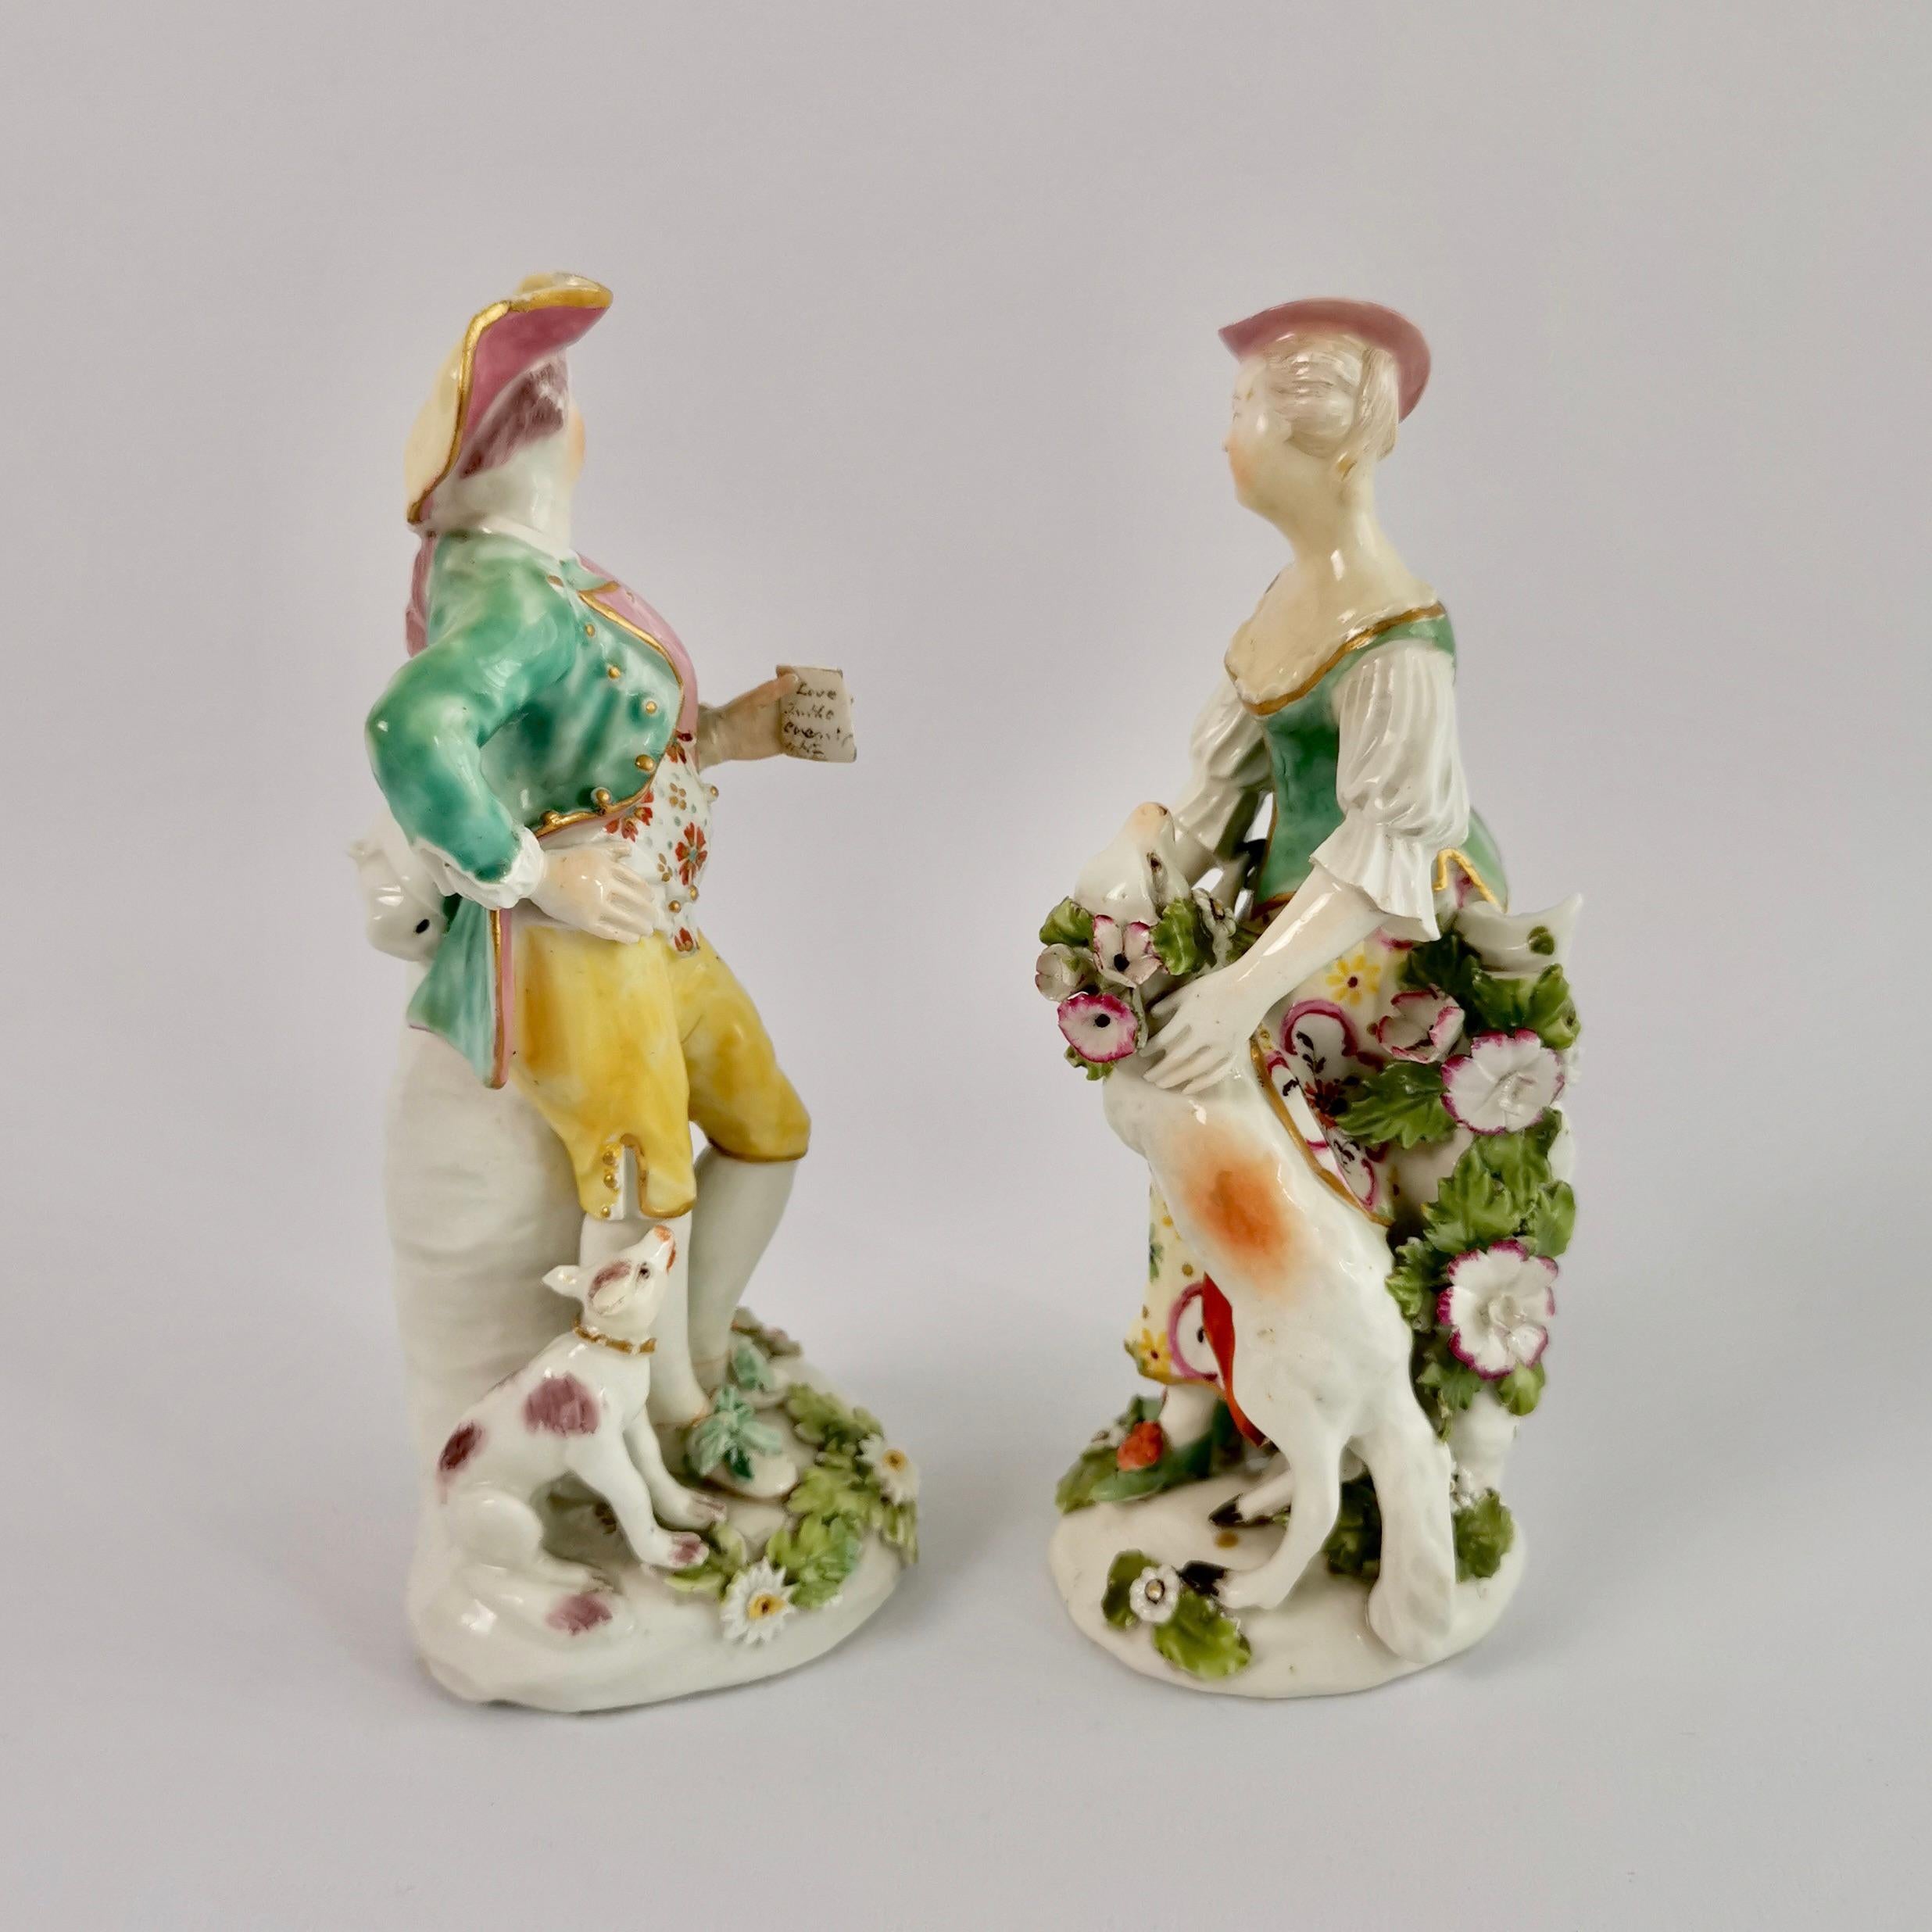 This is a beautiful pair of Derby figures called the 